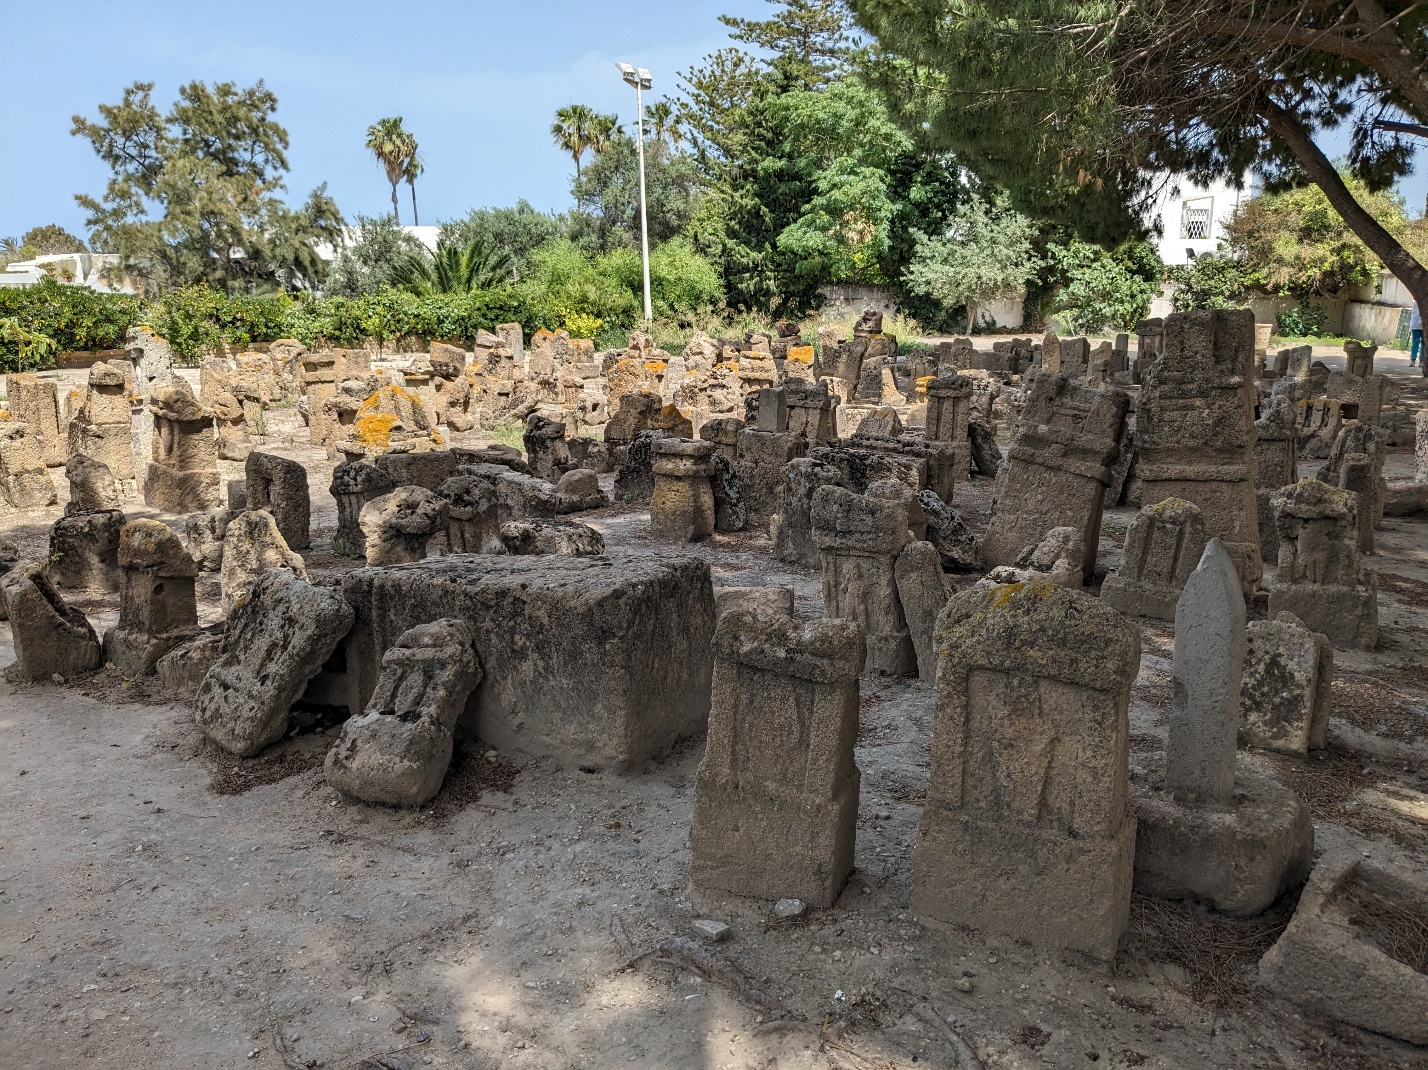 Votive stelae removed from excavations at the “Precinct of Tanit” in Carthage, currently on view at the archaeological site (photo by H. Dixon).